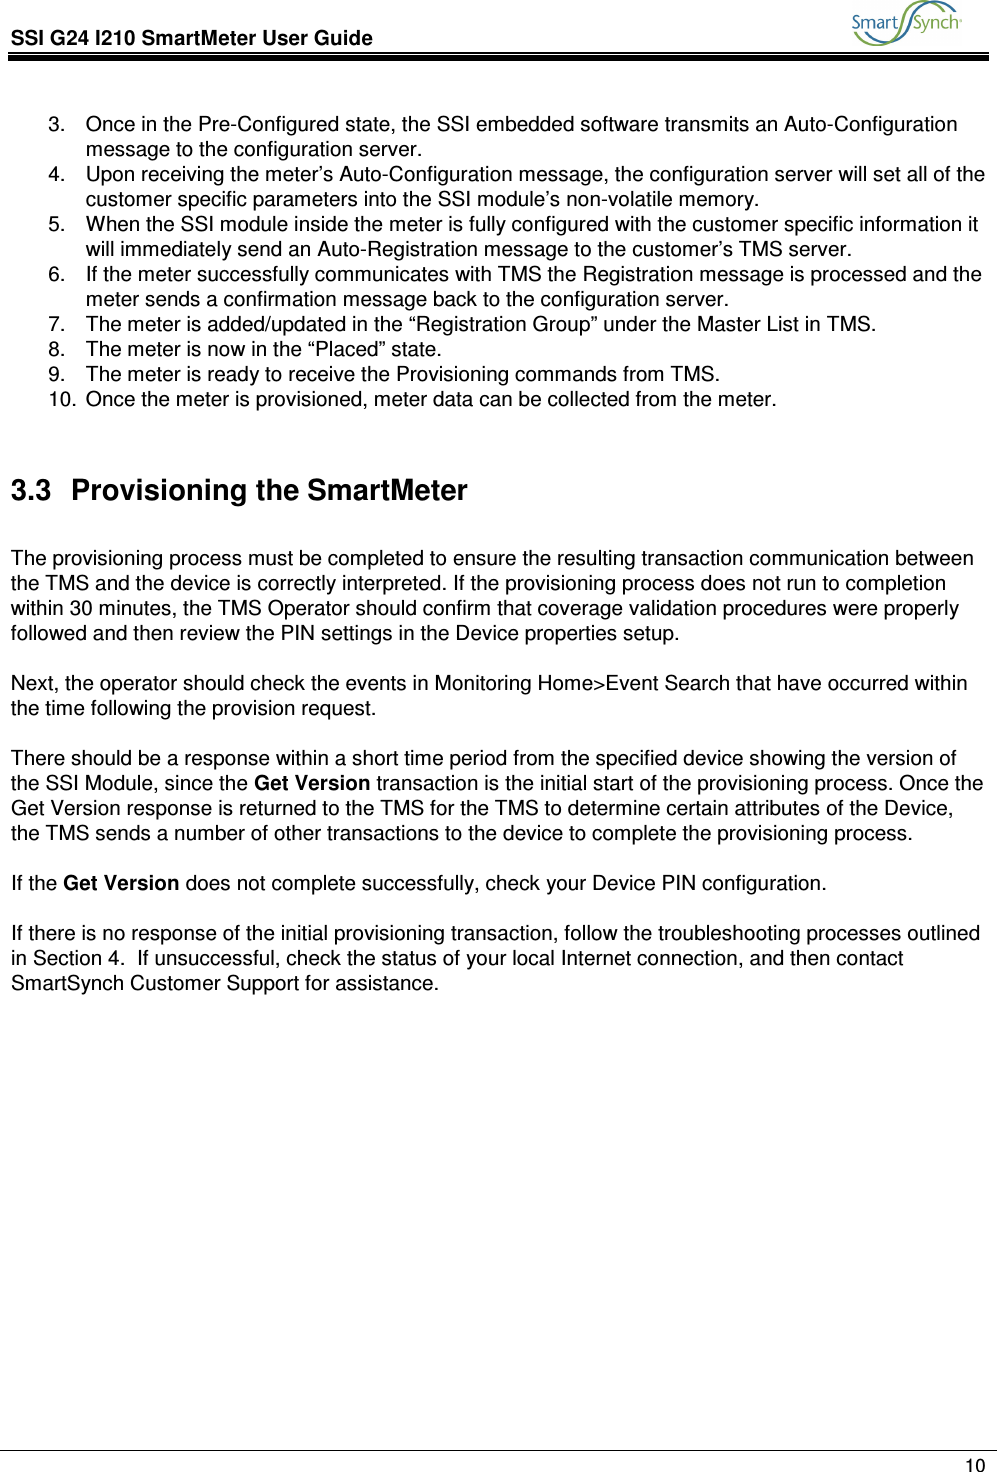 SSI G24 I210 SmartMeter User Guide               10  3.  Once in the Pre-Configured state, the SSI embedded software transmits an Auto-Configuration message to the configuration server. 4.  Upon receiving the meter’s Auto-Configuration message, the configuration server will set all of the customer specific parameters into the SSI module’s non-volatile memory. 5.  When the SSI module inside the meter is fully configured with the customer specific information it will immediately send an Auto-Registration message to the customer’s TMS server. 6.  If the meter successfully communicates with TMS the Registration message is processed and the meter sends a confirmation message back to the configuration server. 7.  The meter is added/updated in the “Registration Group” under the Master List in TMS. 8.  The meter is now in the “Placed” state. 9.  The meter is ready to receive the Provisioning commands from TMS. 10.  Once the meter is provisioned, meter data can be collected from the meter.  3.3  Provisioning the SmartMeter  The provisioning process must be completed to ensure the resulting transaction communication between the TMS and the device is correctly interpreted. If the provisioning process does not run to completion within 30 minutes, the TMS Operator should confirm that coverage validation procedures were properly followed and then review the PIN settings in the Device properties setup.  Next, the operator should check the events in Monitoring Home&gt;Event Search that have occurred within the time following the provision request.   There should be a response within a short time period from the specified device showing the version of the SSI Module, since the Get Version transaction is the initial start of the provisioning process. Once the Get Version response is returned to the TMS for the TMS to determine certain attributes of the Device, the TMS sends a number of other transactions to the device to complete the provisioning process.  If the Get Version does not complete successfully, check your Device PIN configuration.  If there is no response of the initial provisioning transaction, follow the troubleshooting processes outlined in Section 4.  If unsuccessful, check the status of your local Internet connection, and then contact SmartSynch Customer Support for assistance.              